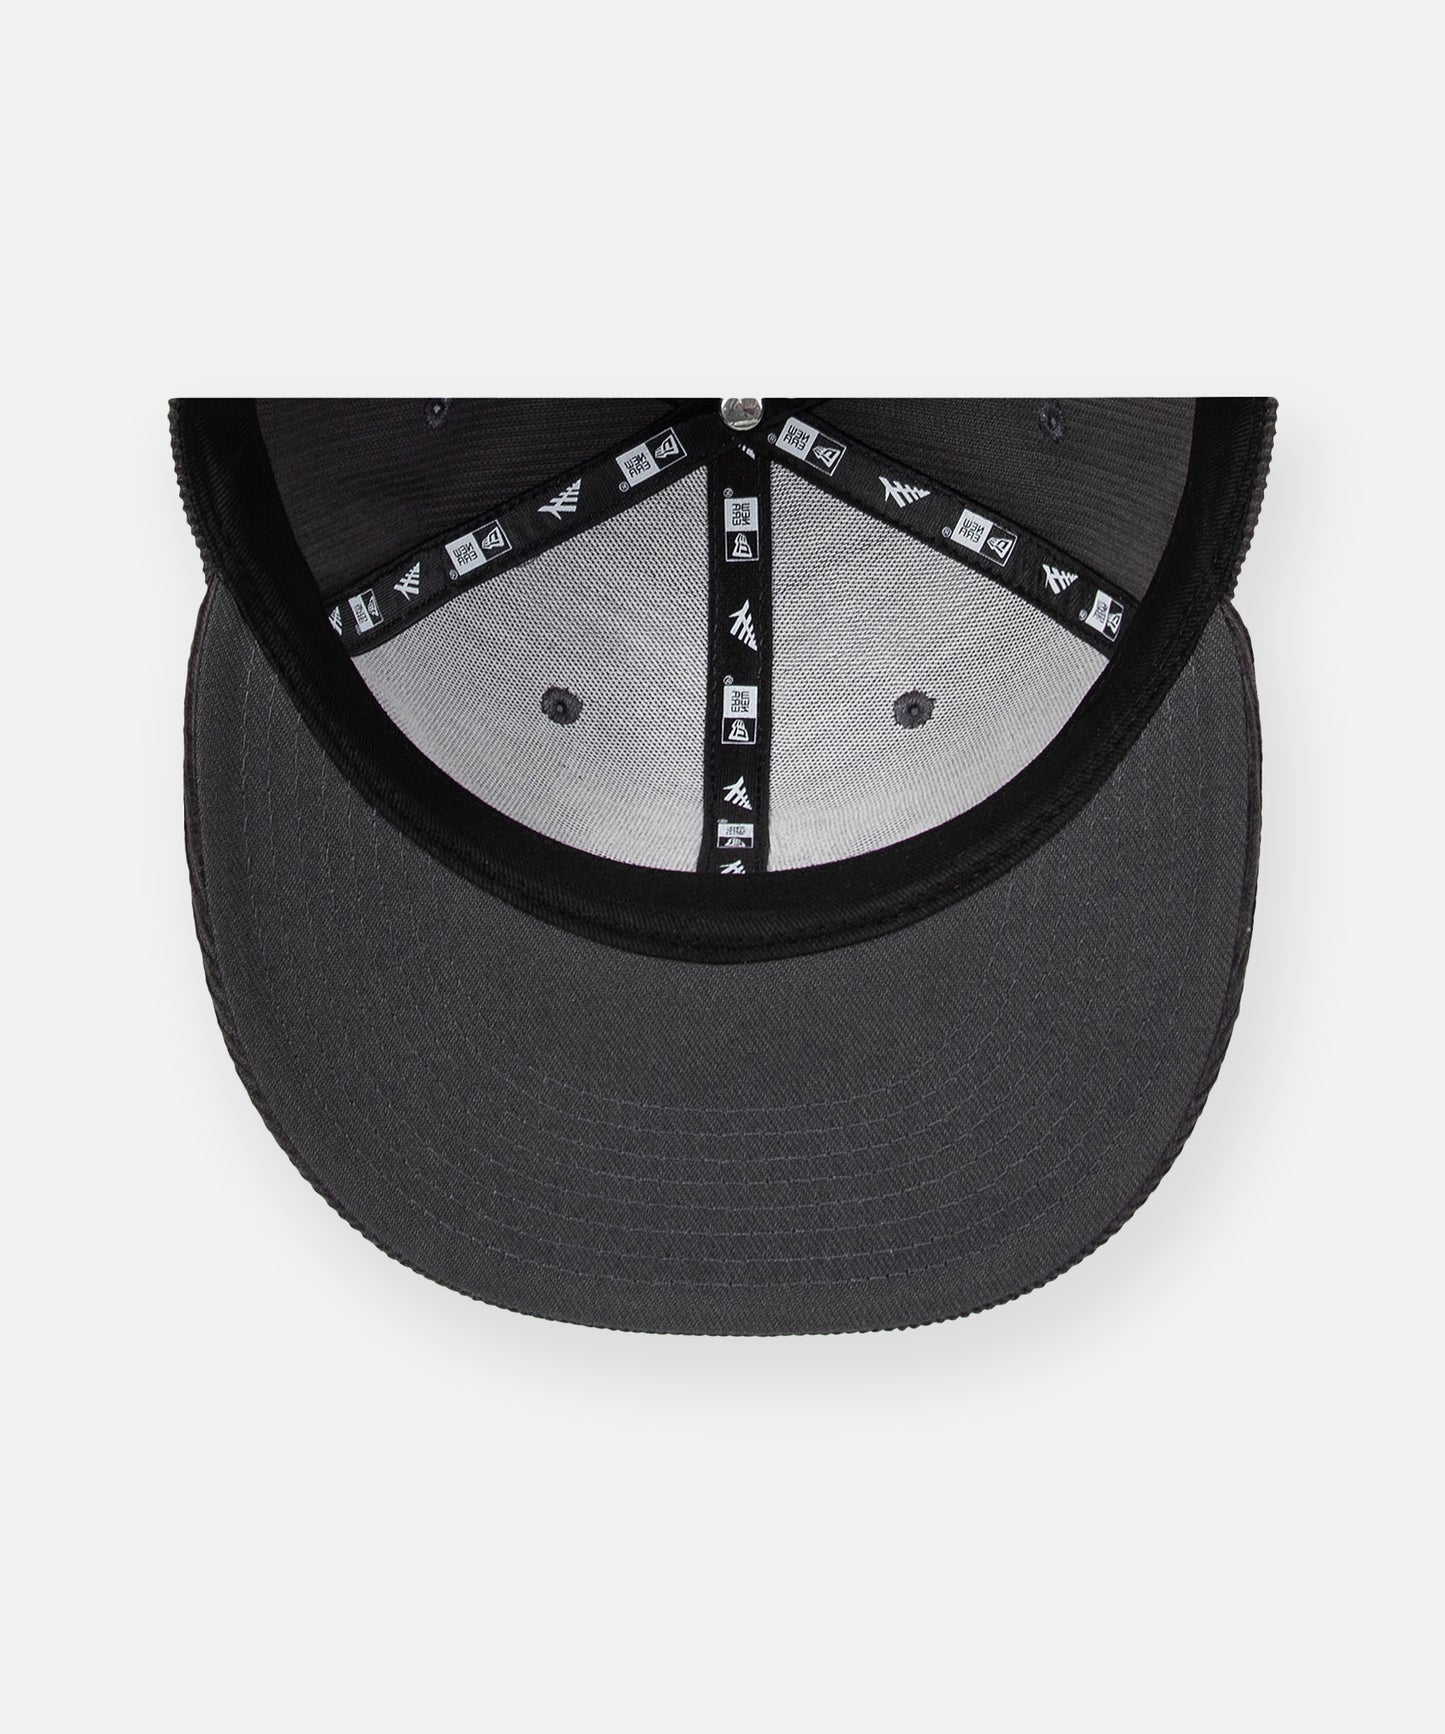 CUSTOM_ALT_TEXT: Tonal undervisor on Paper Planes Corduroy Crown 59Fifty Fitted Hat, color Graphite.